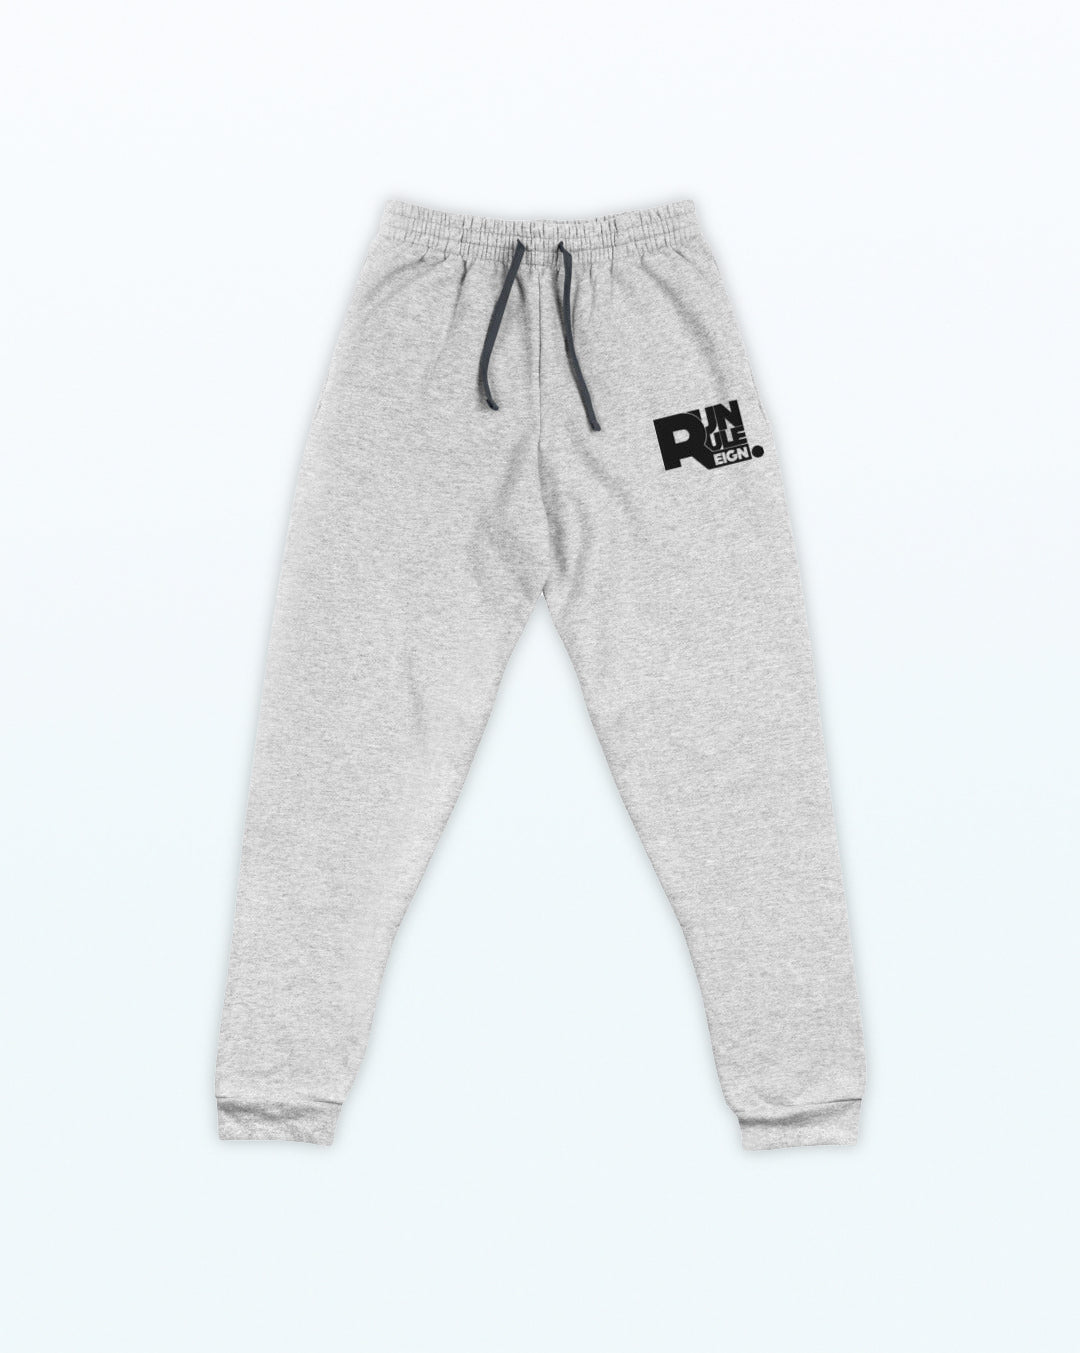 workout casual oversized sweatpants in gray grey athletic heather